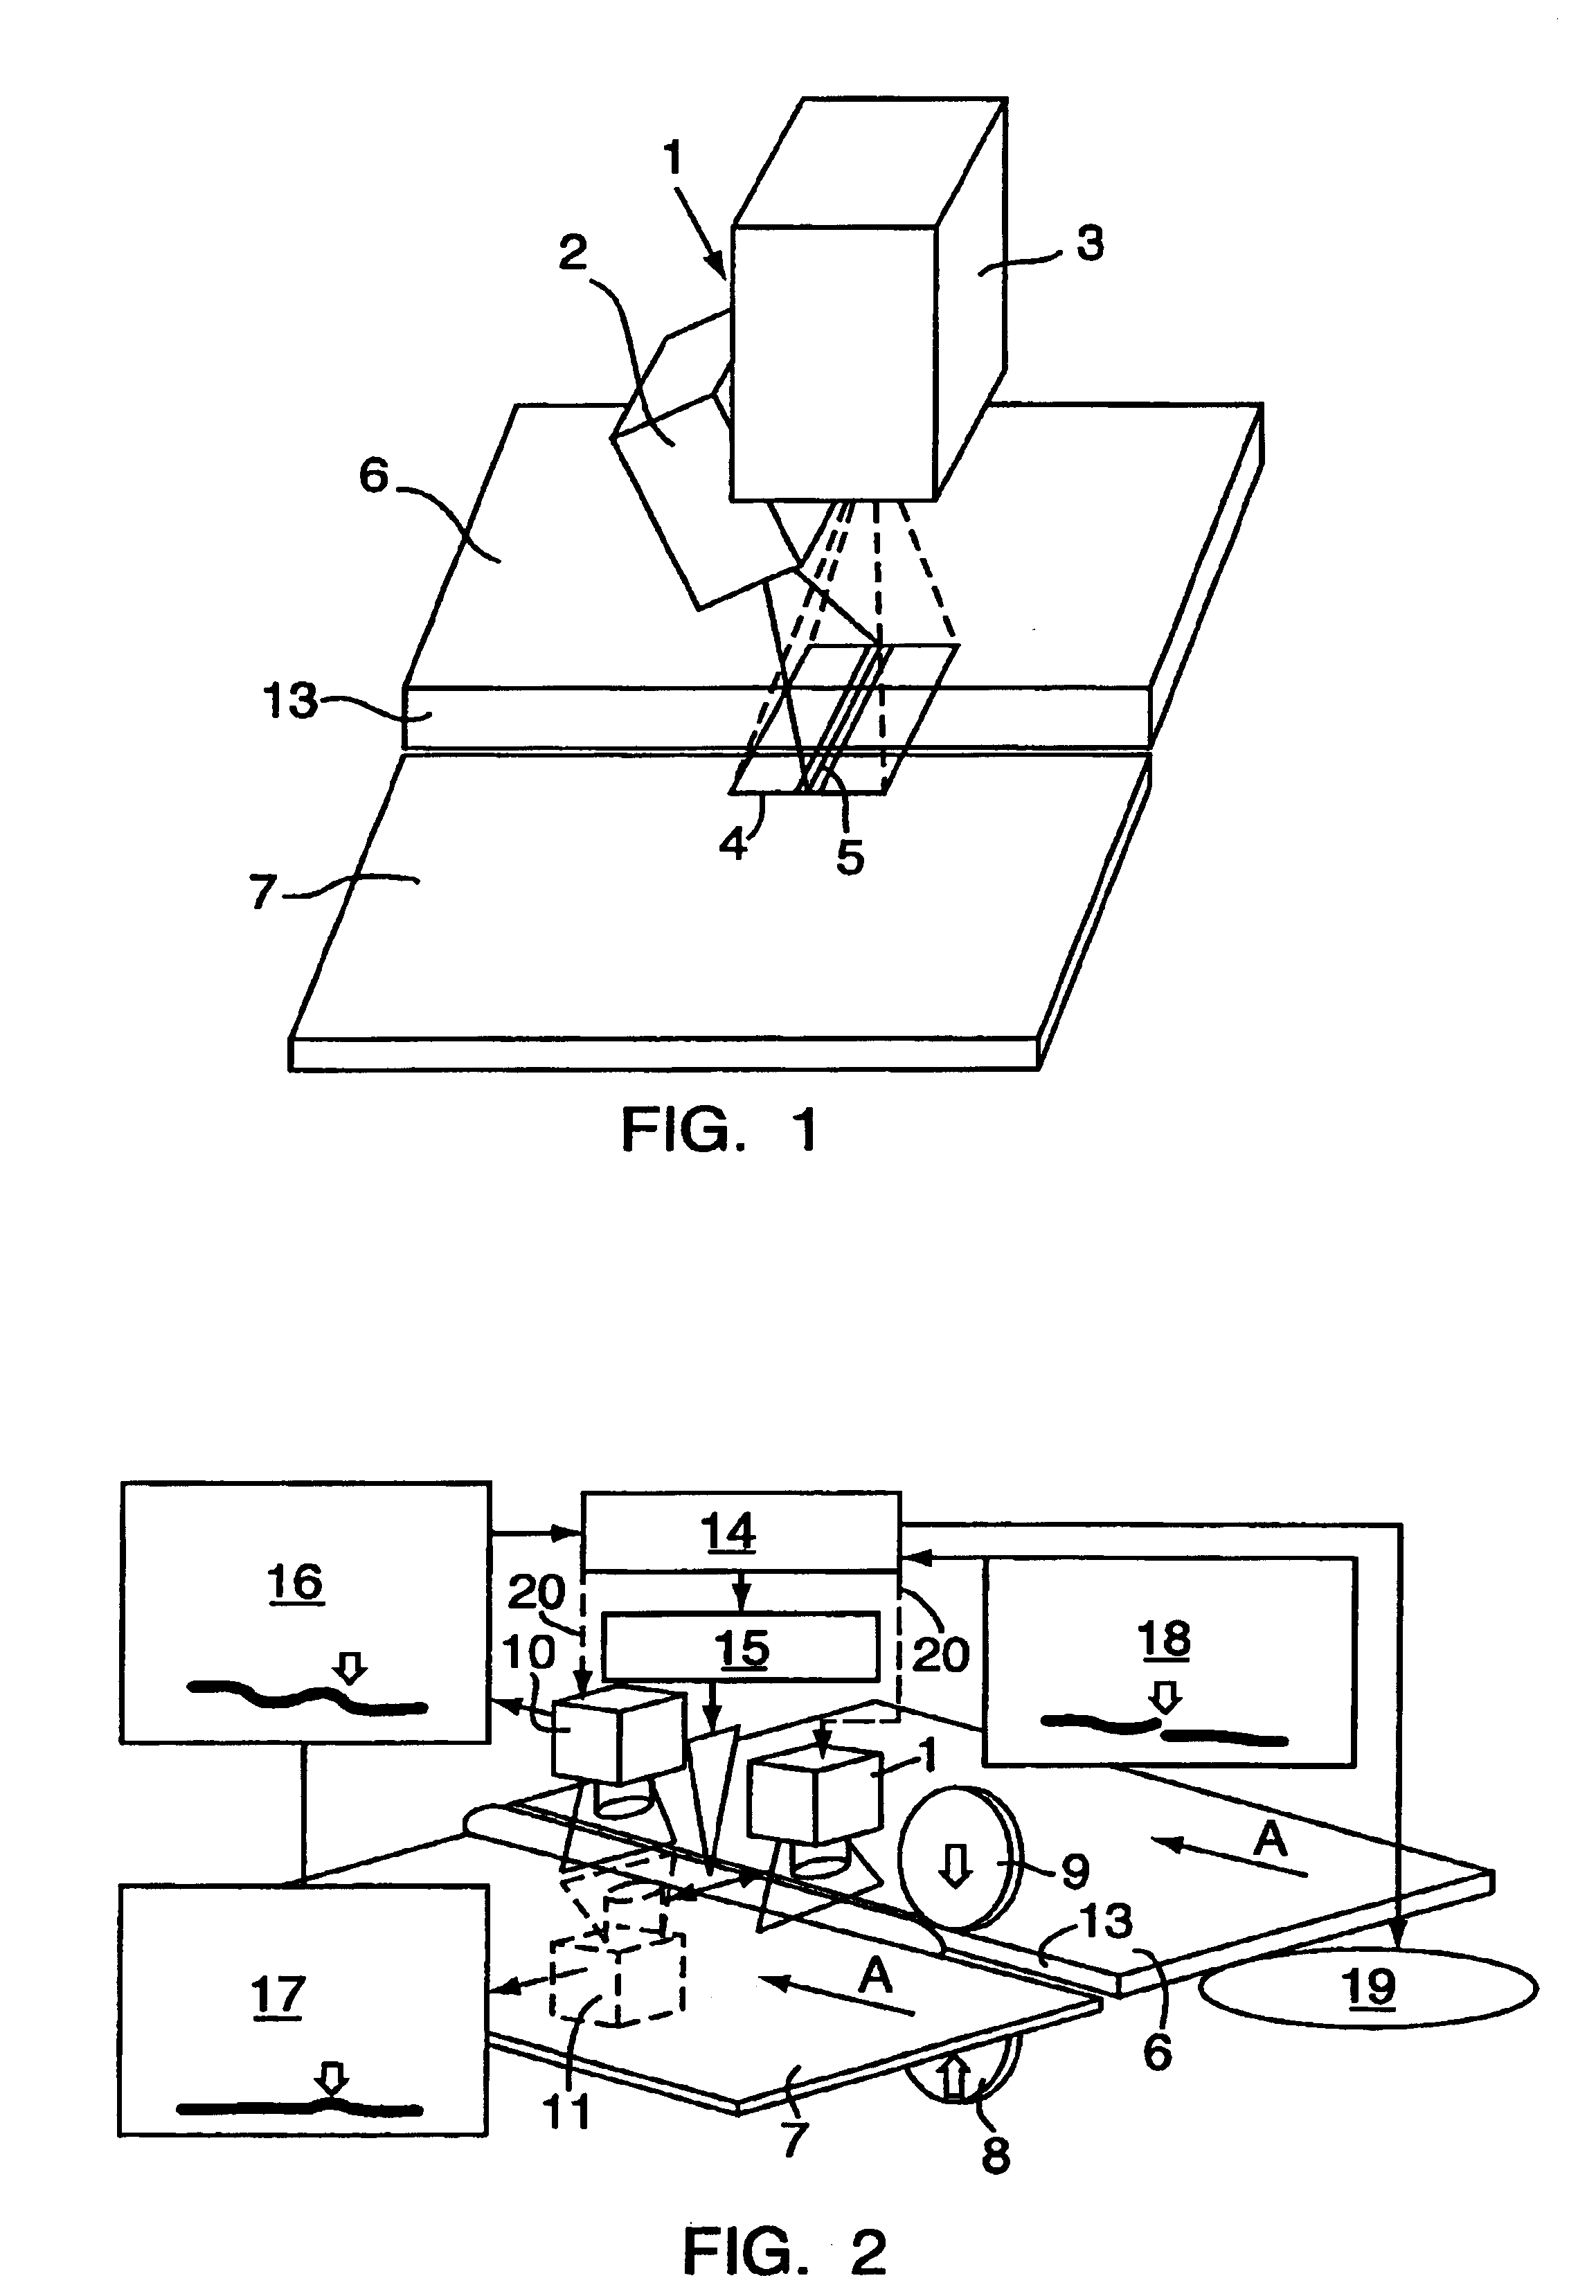 Method and apparatus for following and inspecting an edge or border